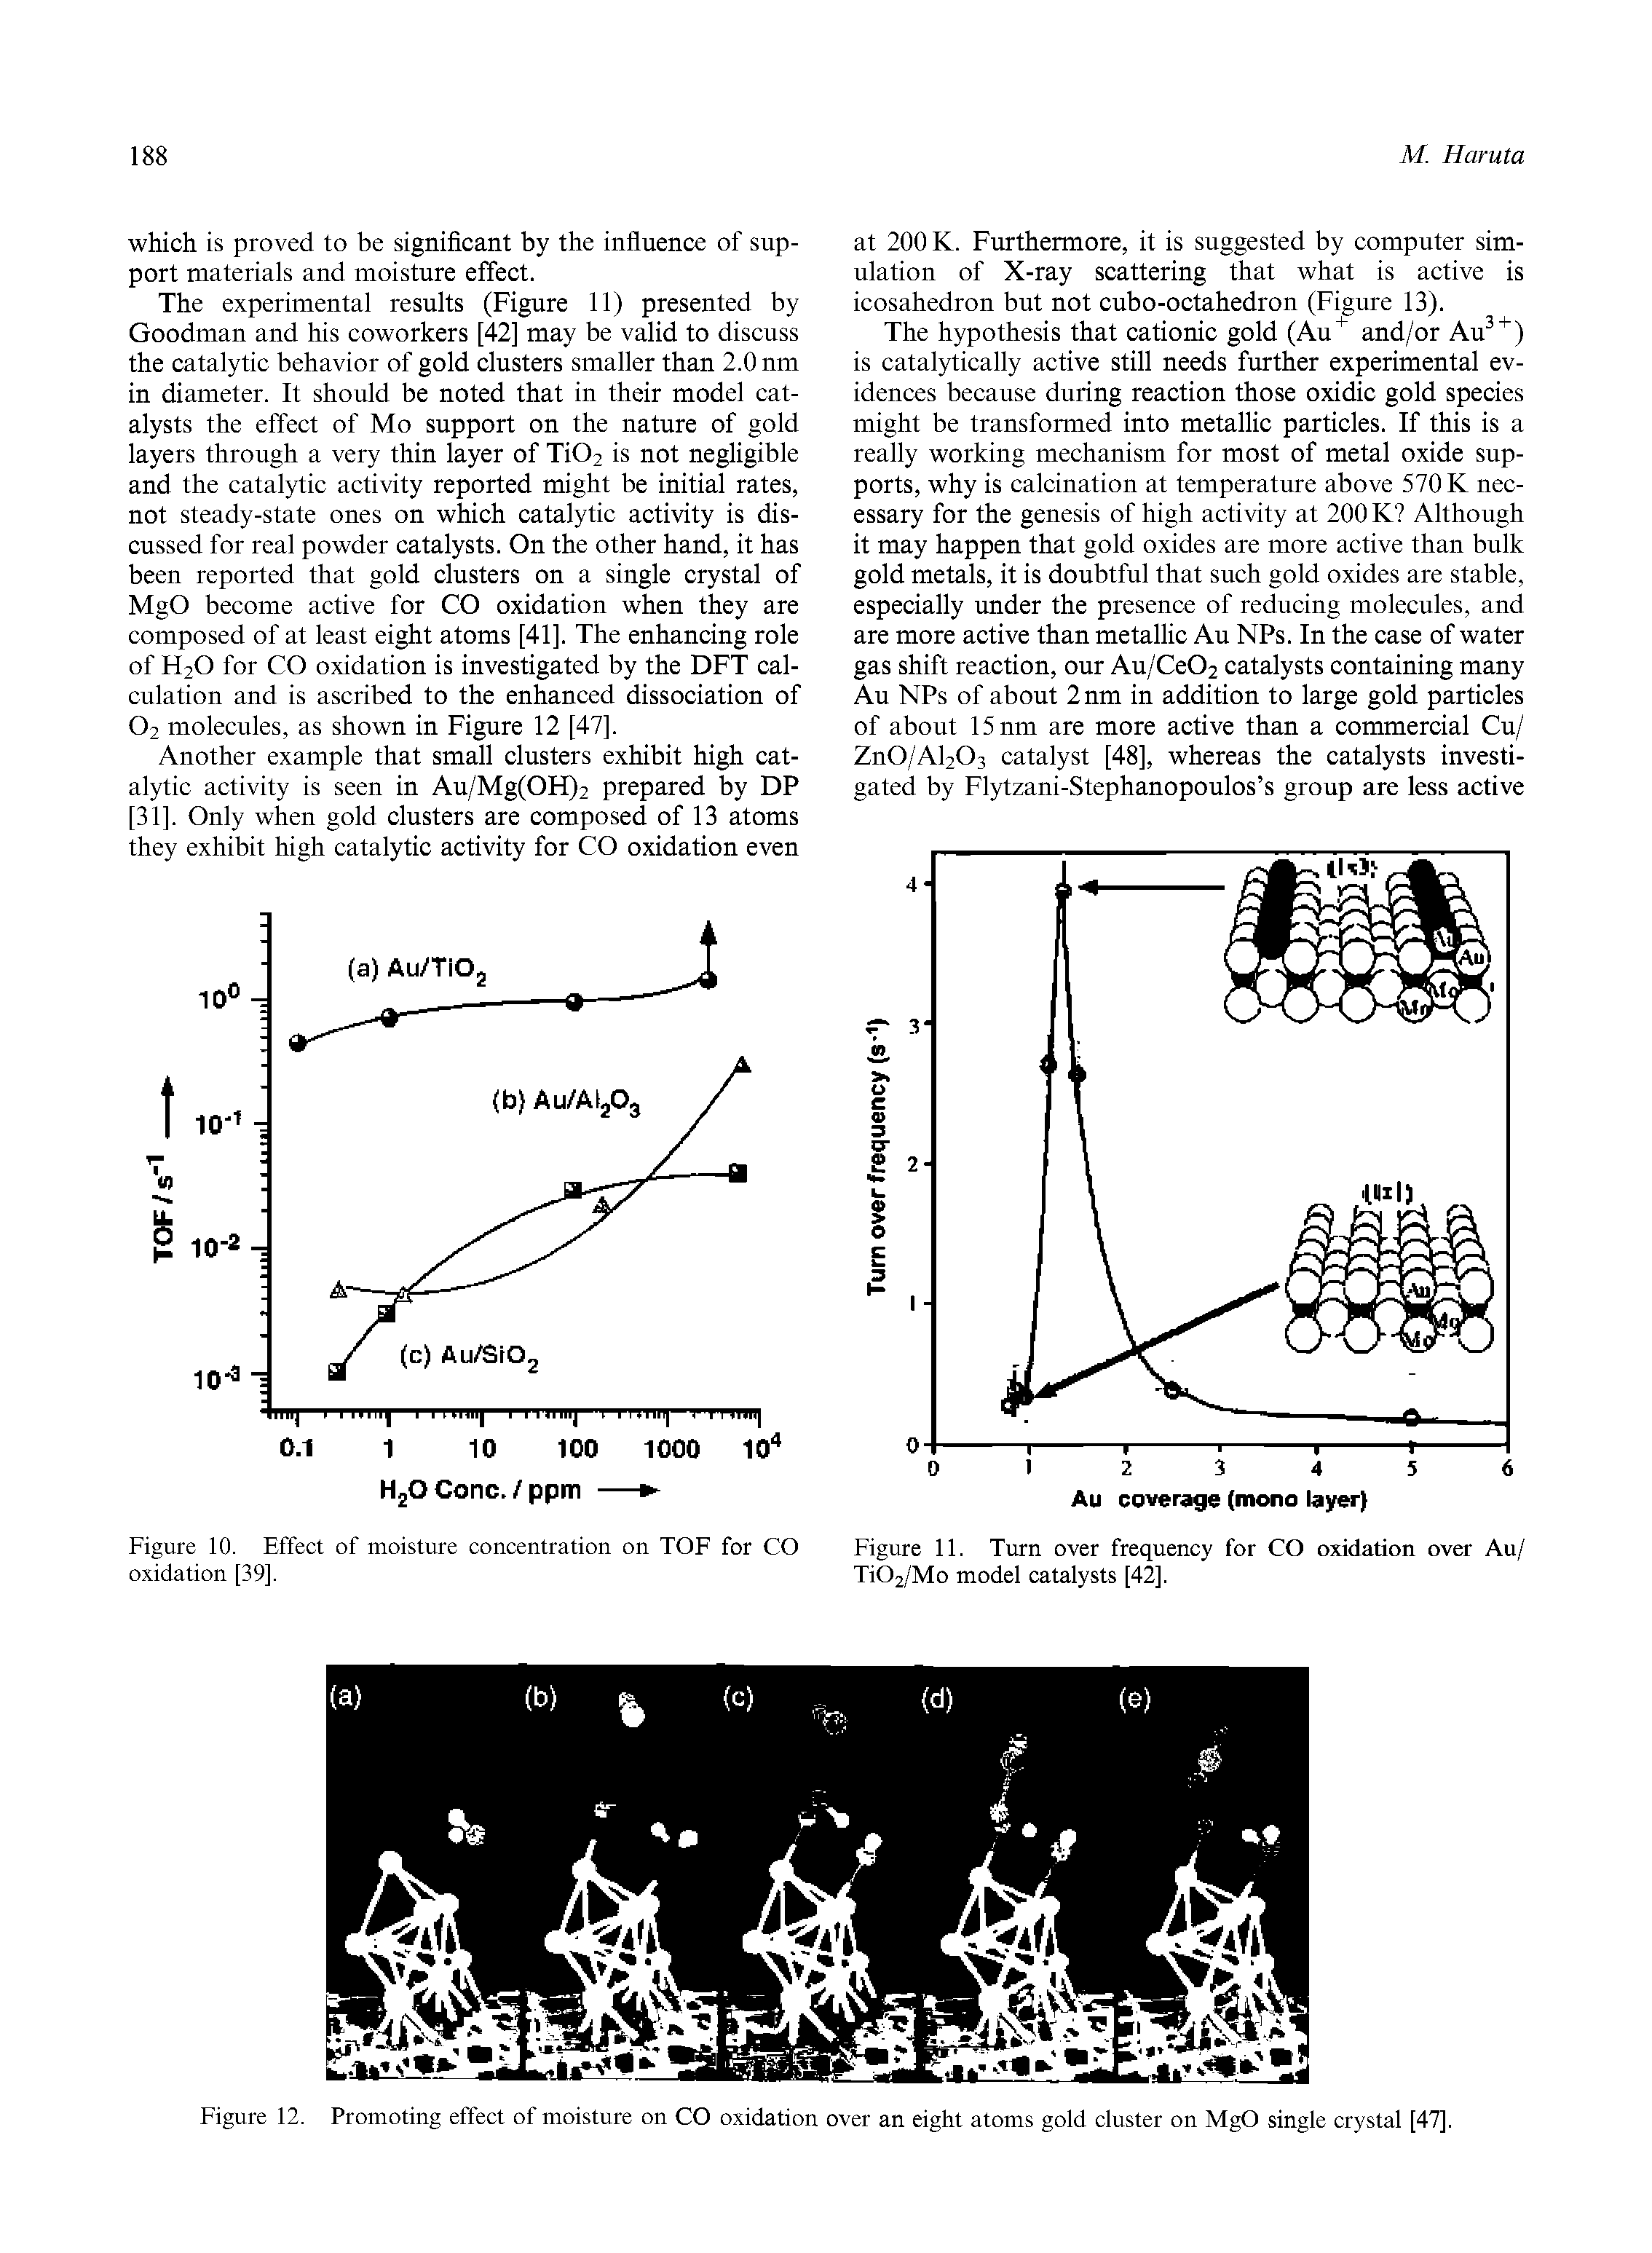 Figure 12. Promoting effect of moisture on CO oxidation over an eight atoms gold cluster on MgO single crystal [47].